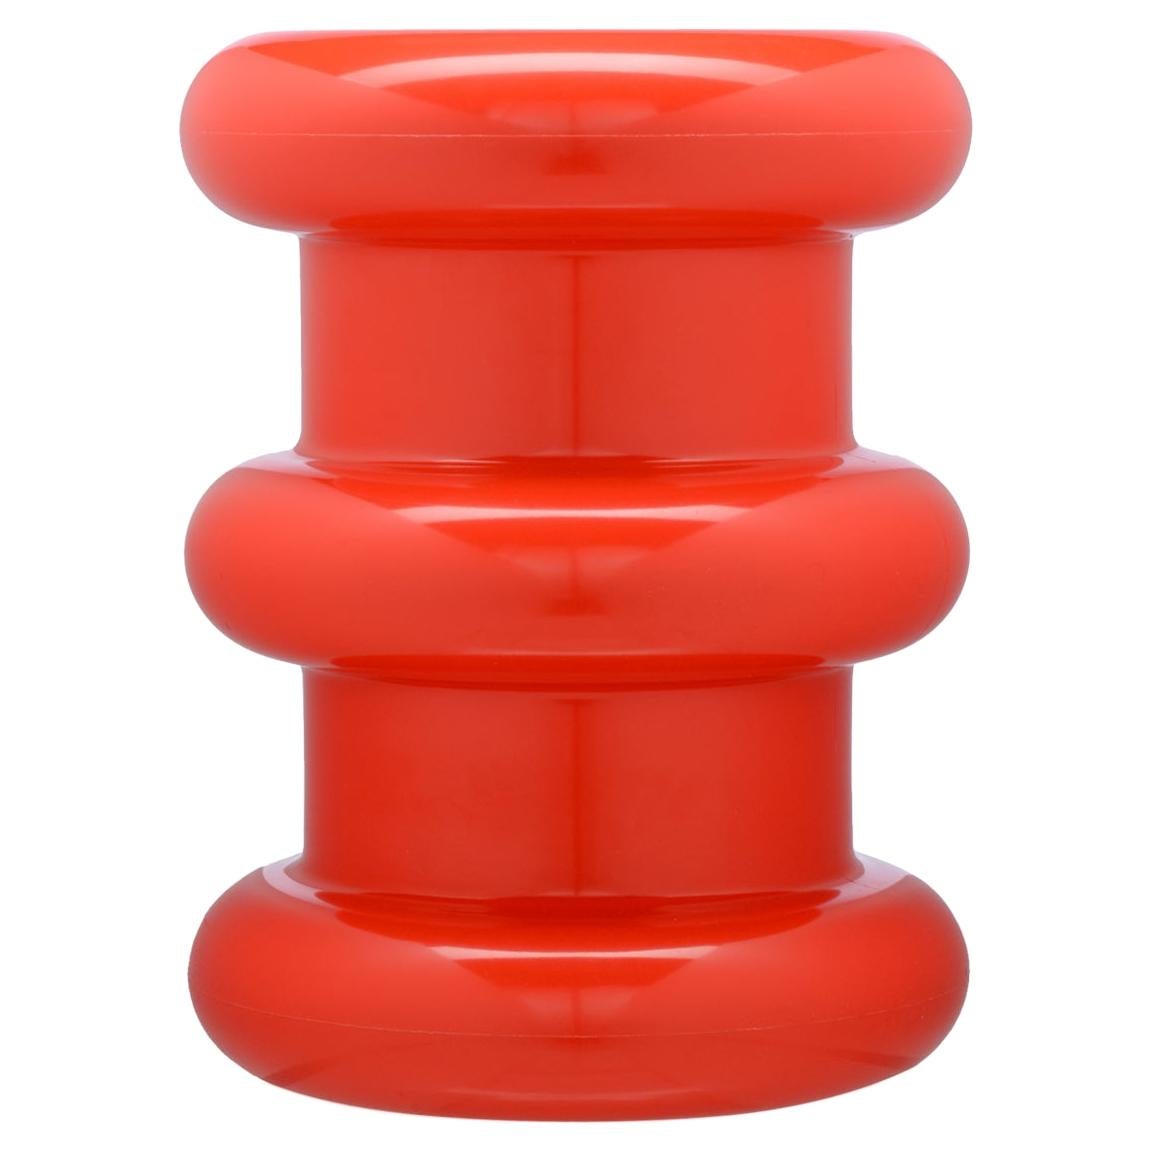 Kartell Pilastro Stool in Red by Ettore Sottsass For Sale